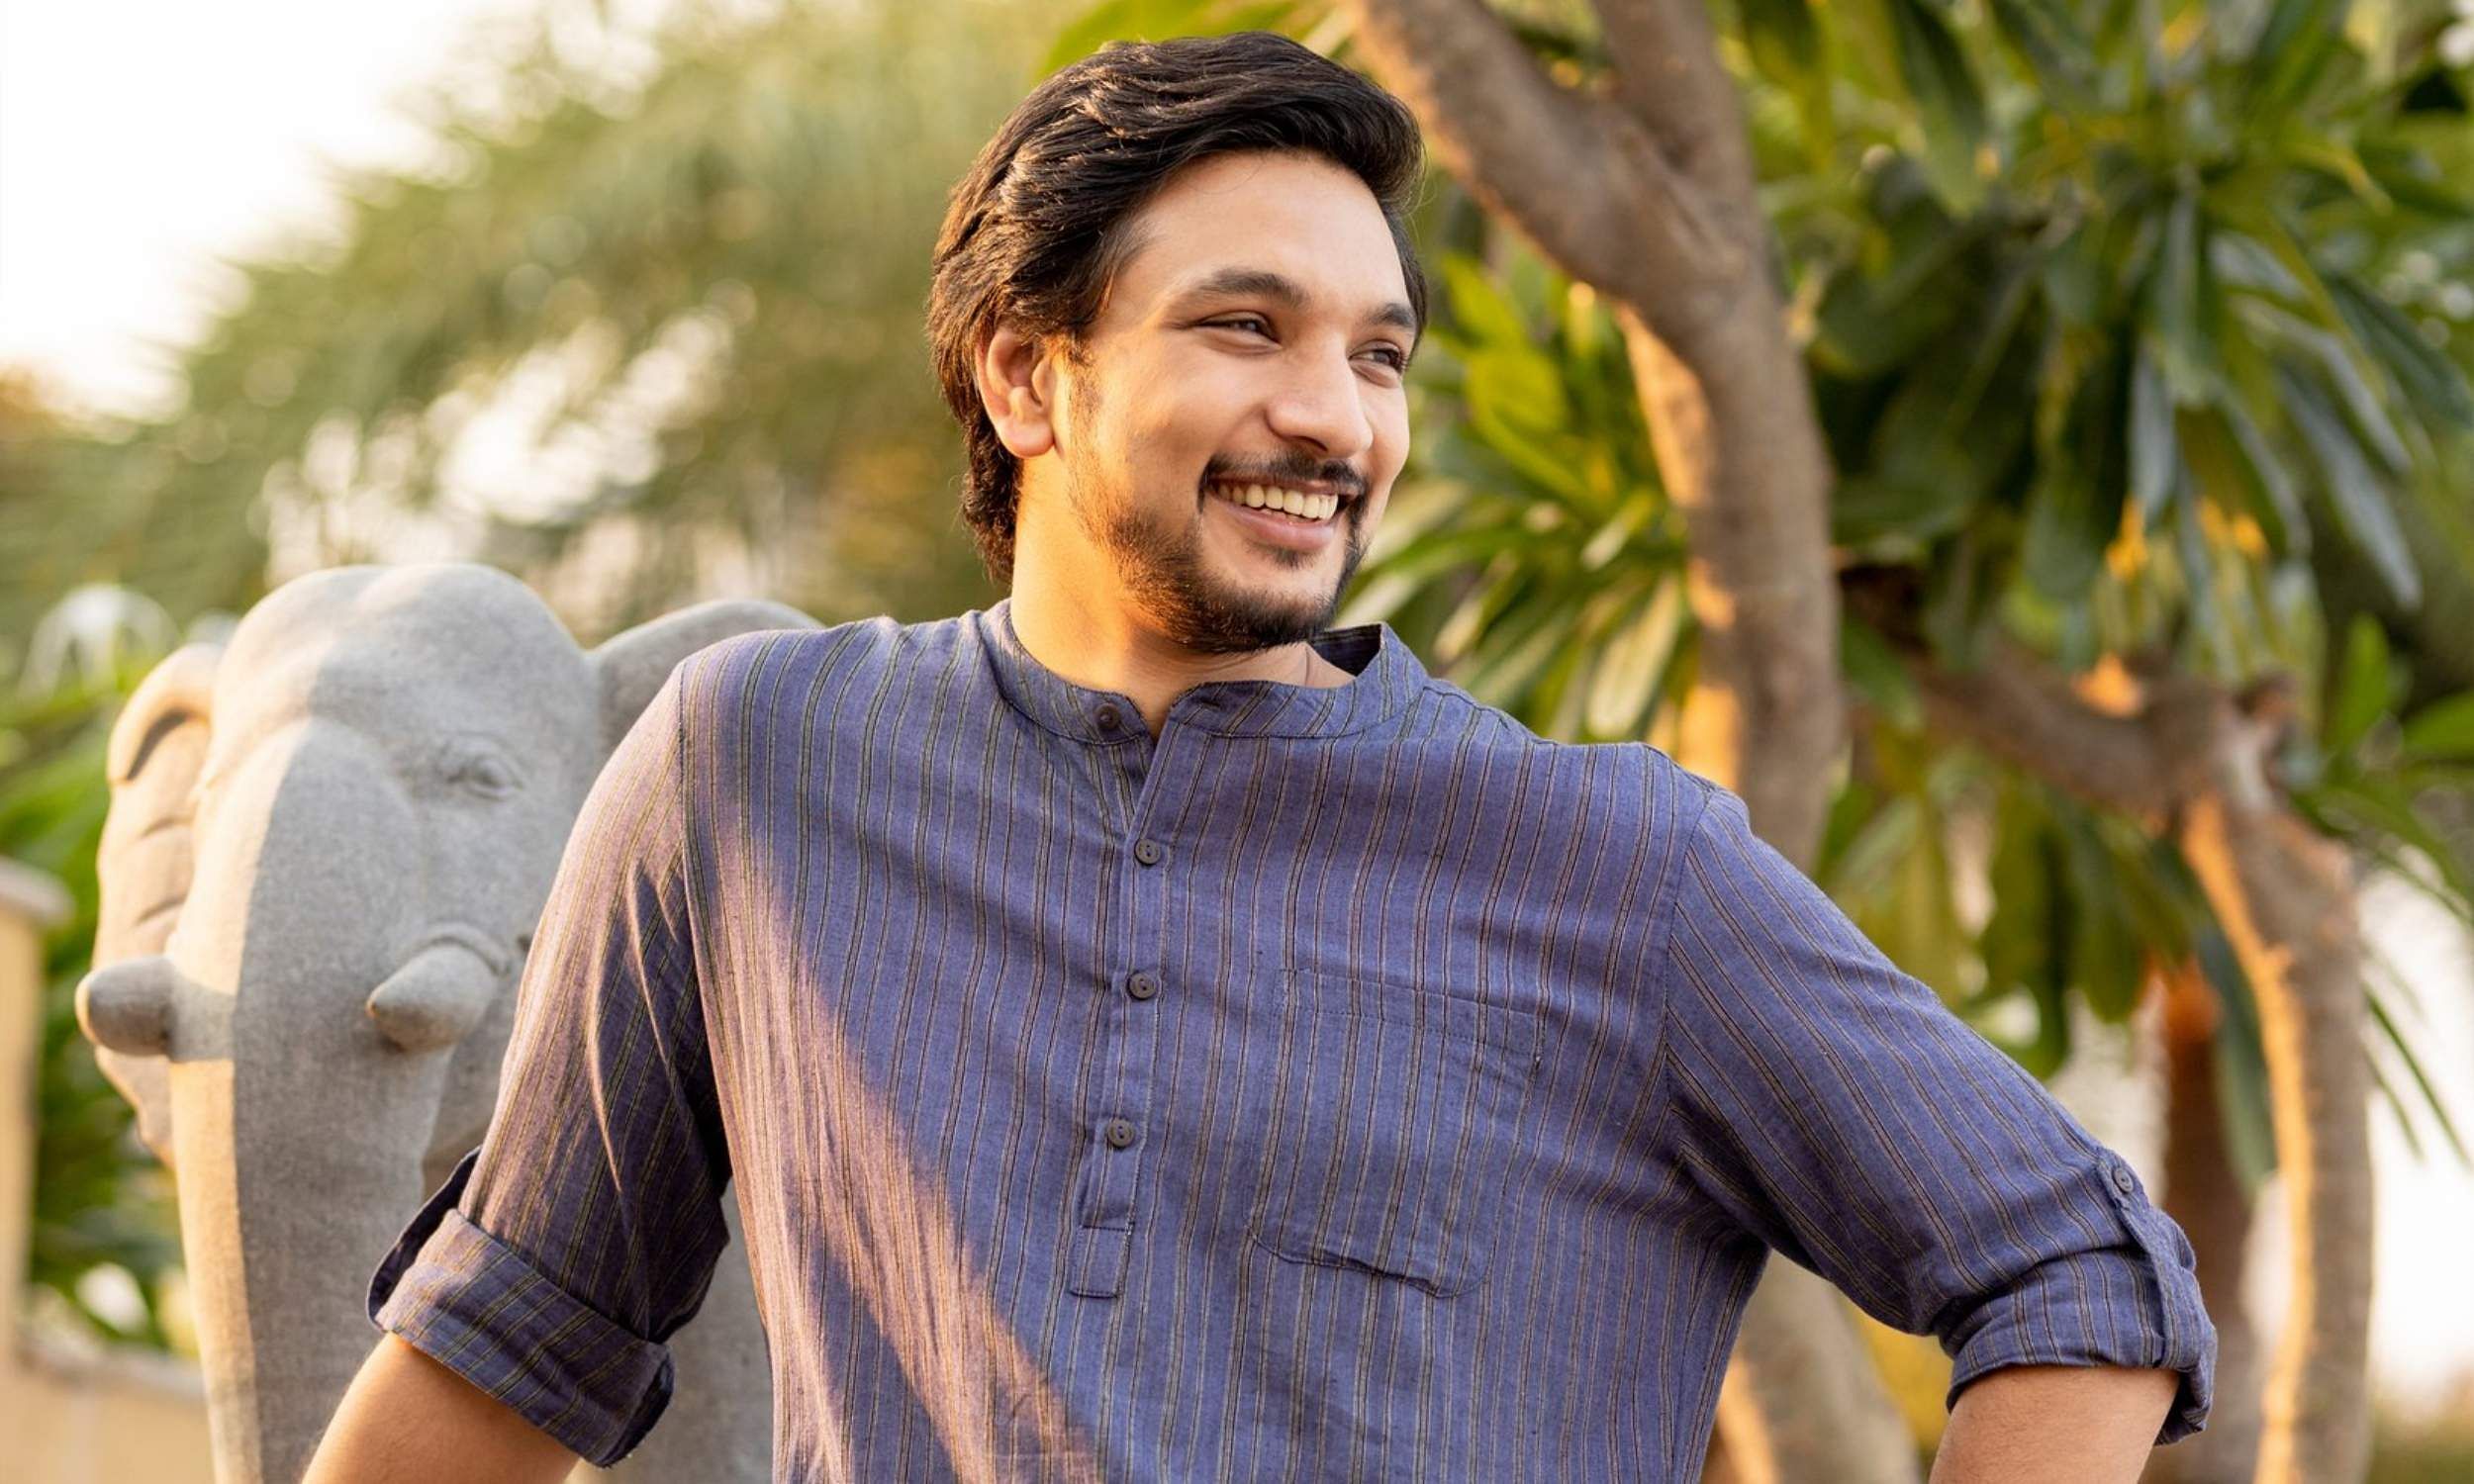 Gautham Karthik: If not for STR brother, Pathu Thala would have remained an unfulfilled project